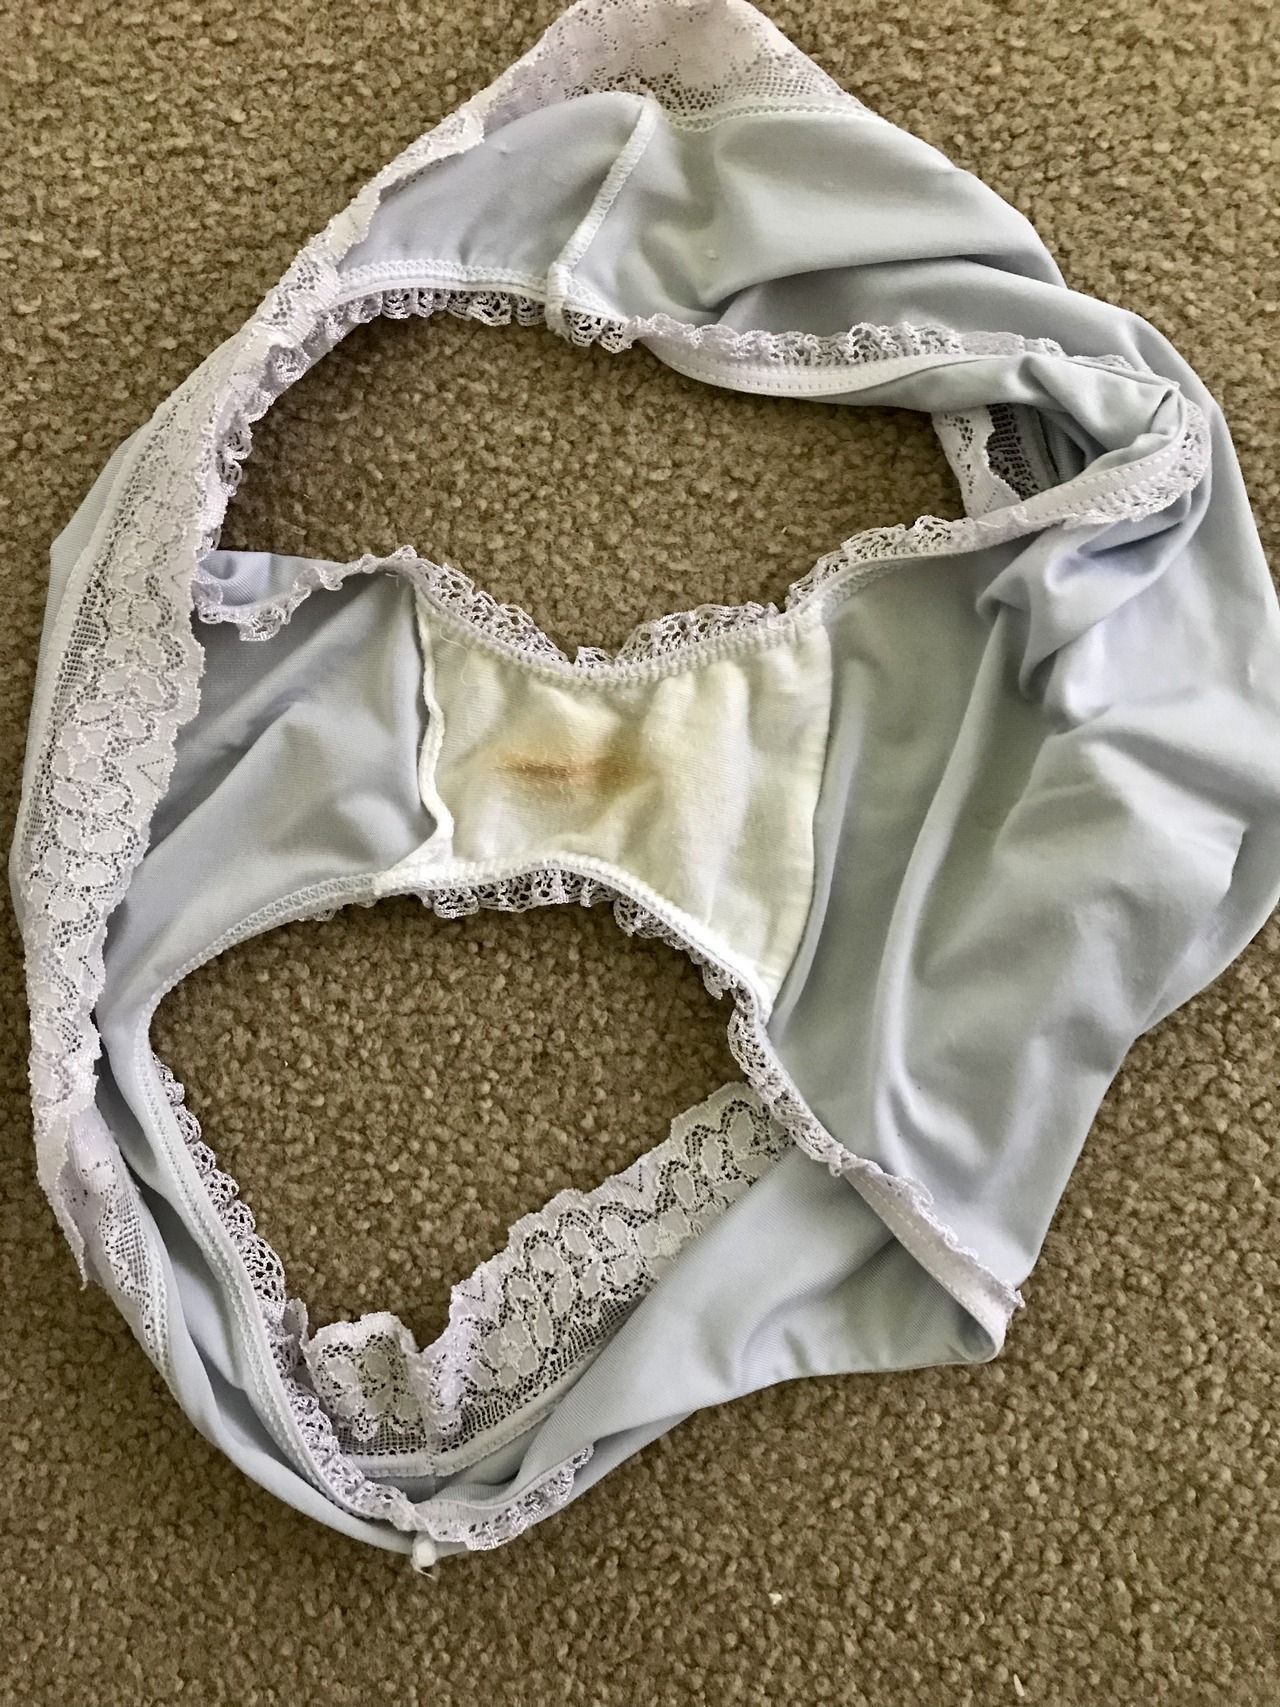 courtney froelich add mom sniffs daughters panties photo